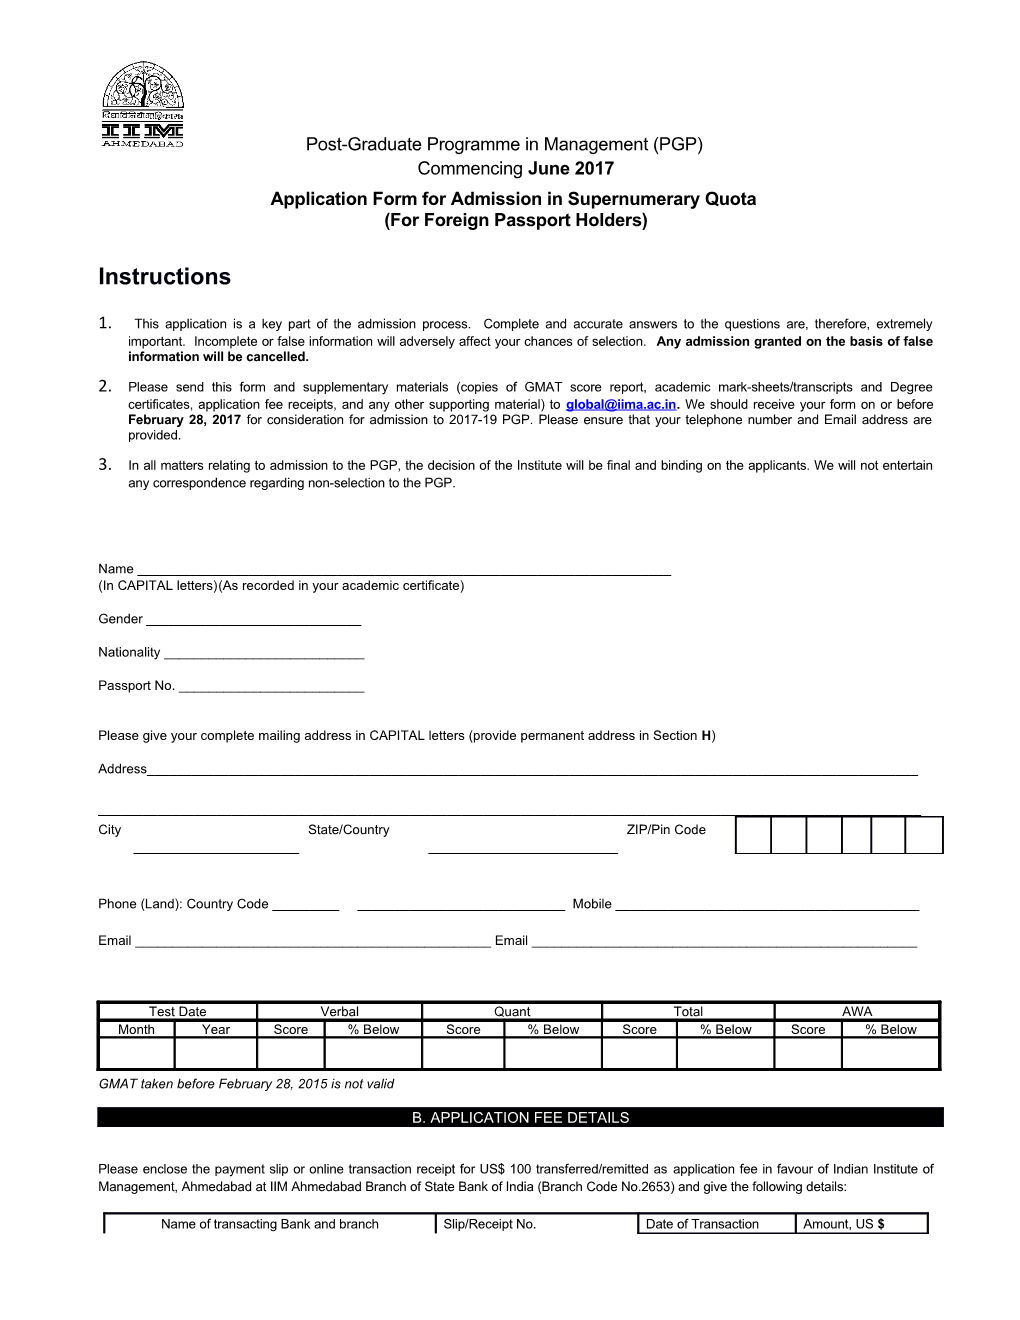 Application Form for Admission in Supernumerary Quota